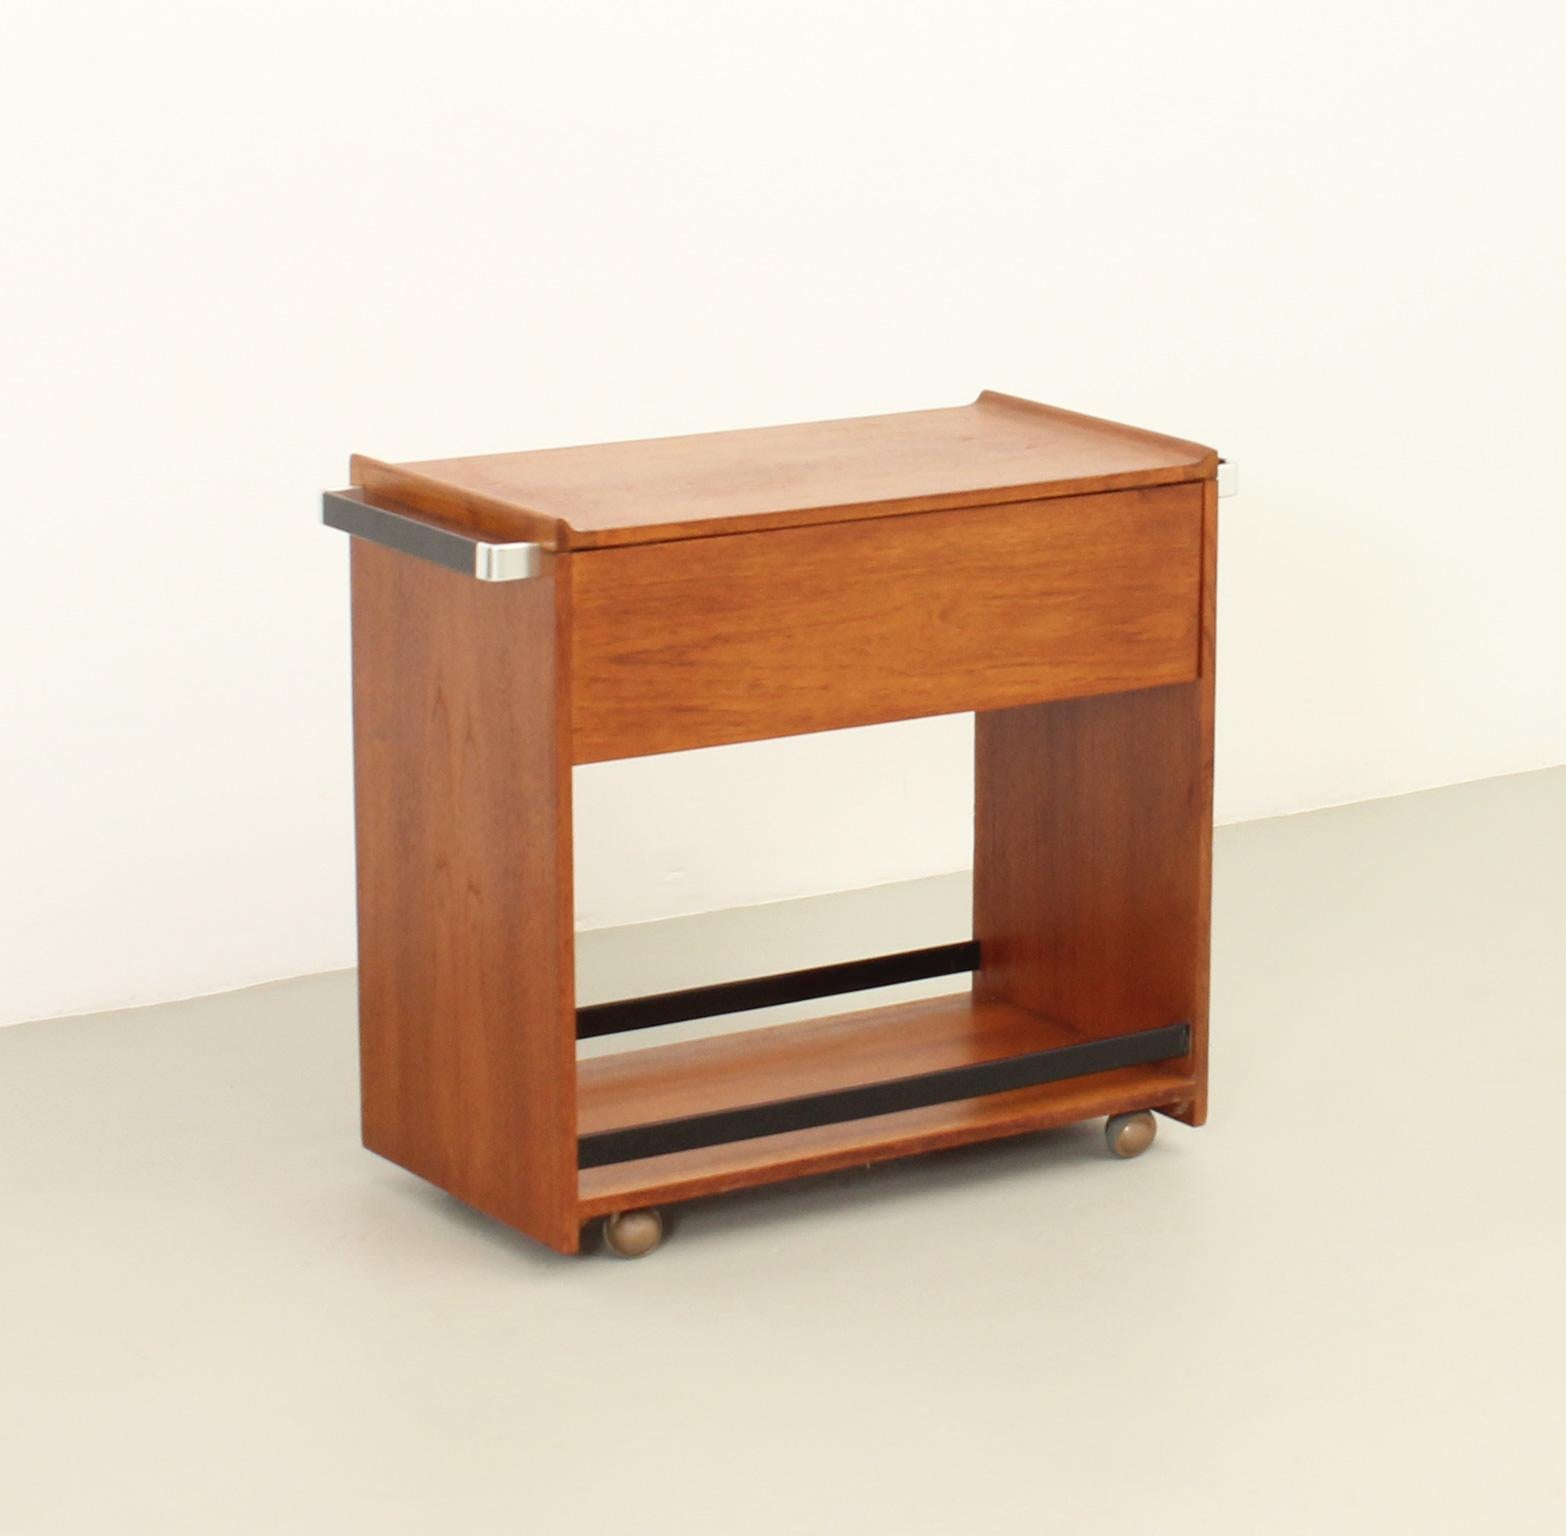 Bar cart in teak wood produced by British company Eedee, 1960's. Teak wood and polished and lacquered aluminum. Two trays and a storage space. 